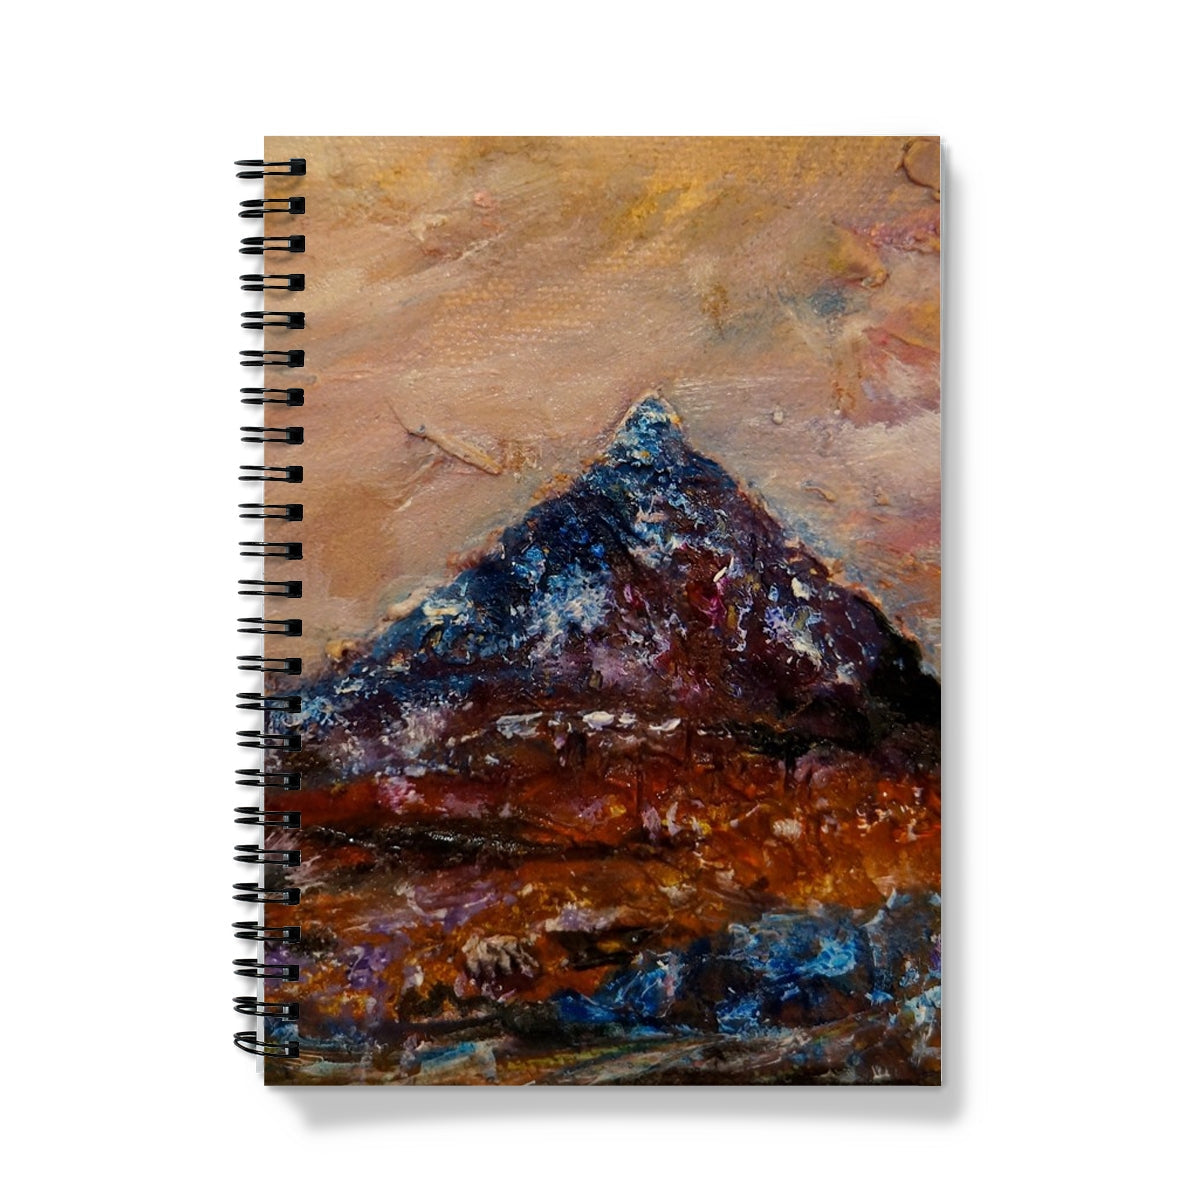 Buachaille Etive Mòr Art Gifts Notebook-Journals & Notebooks-Glencoe Art Gallery-A5-Lined-Paintings, Prints, Homeware, Art Gifts From Scotland By Scottish Artist Kevin Hunter